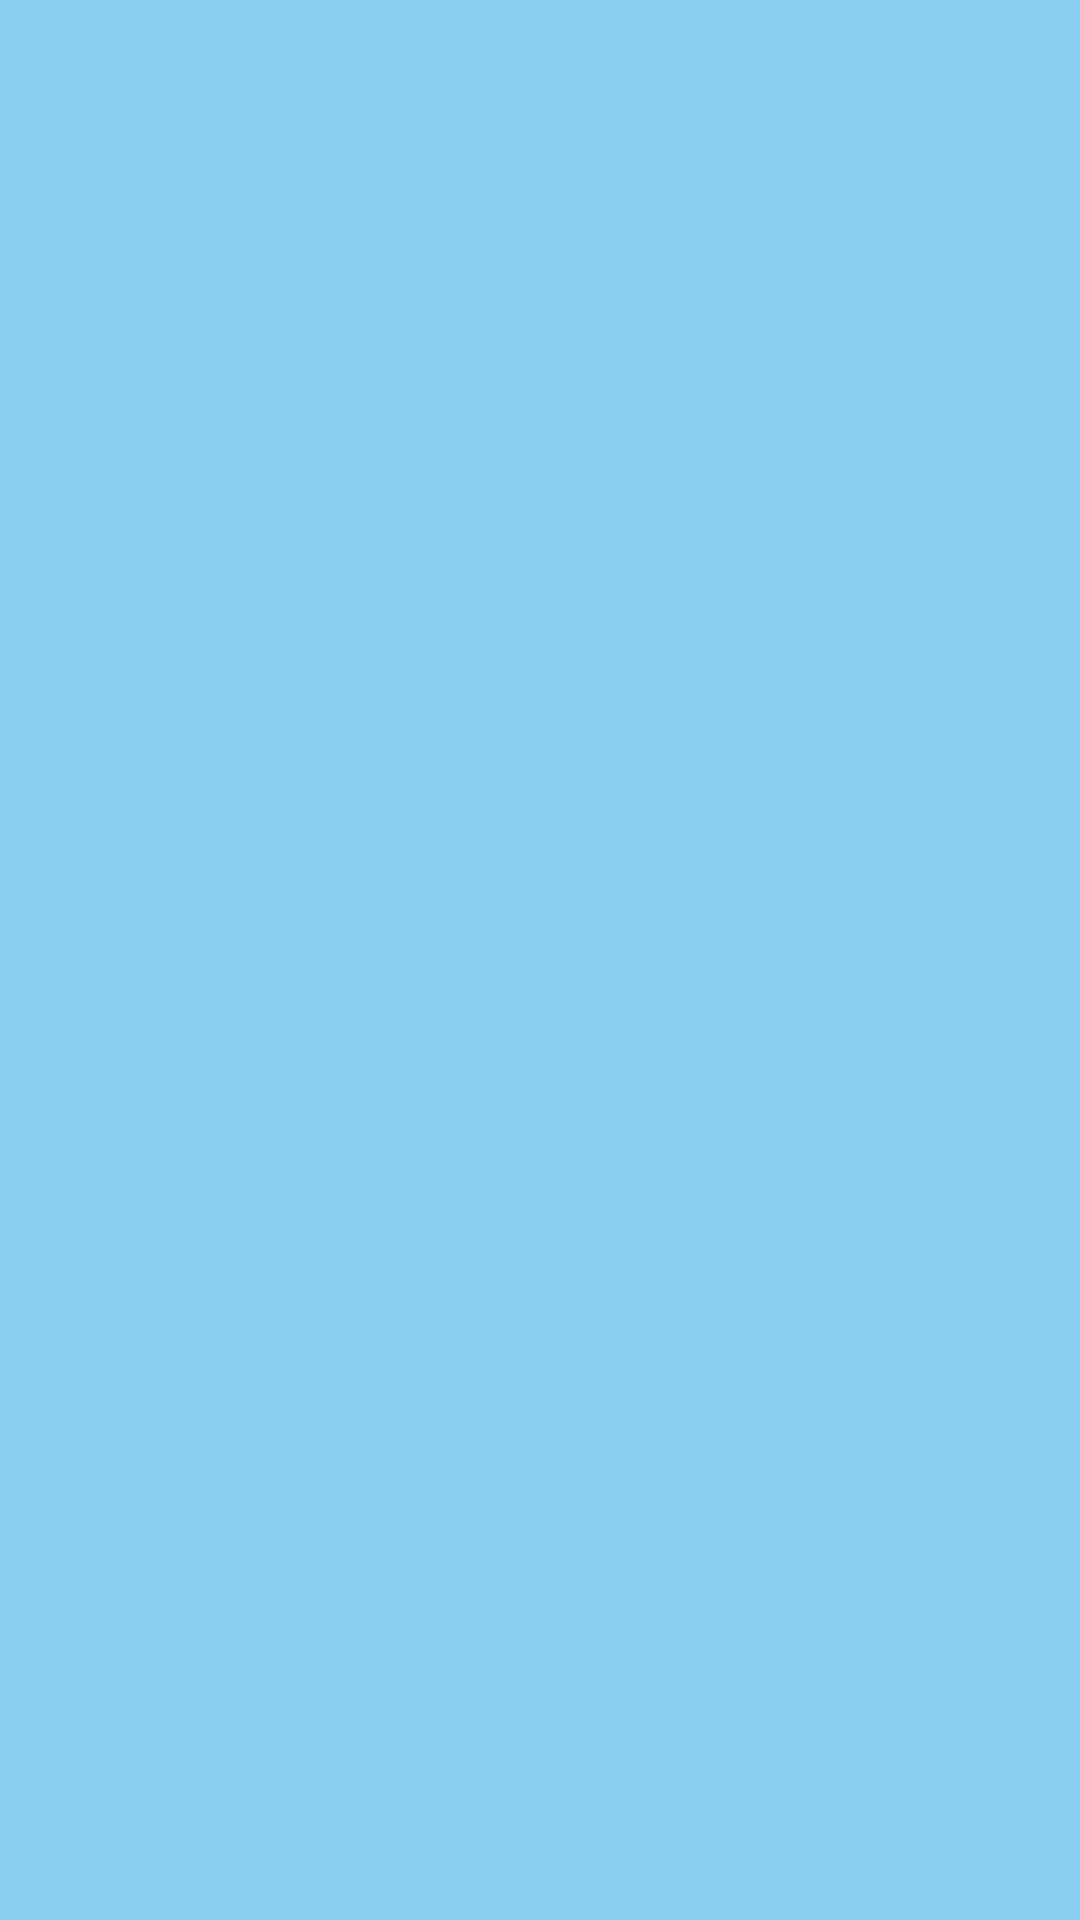 1080x1920 Baby Blue Solid Color Background